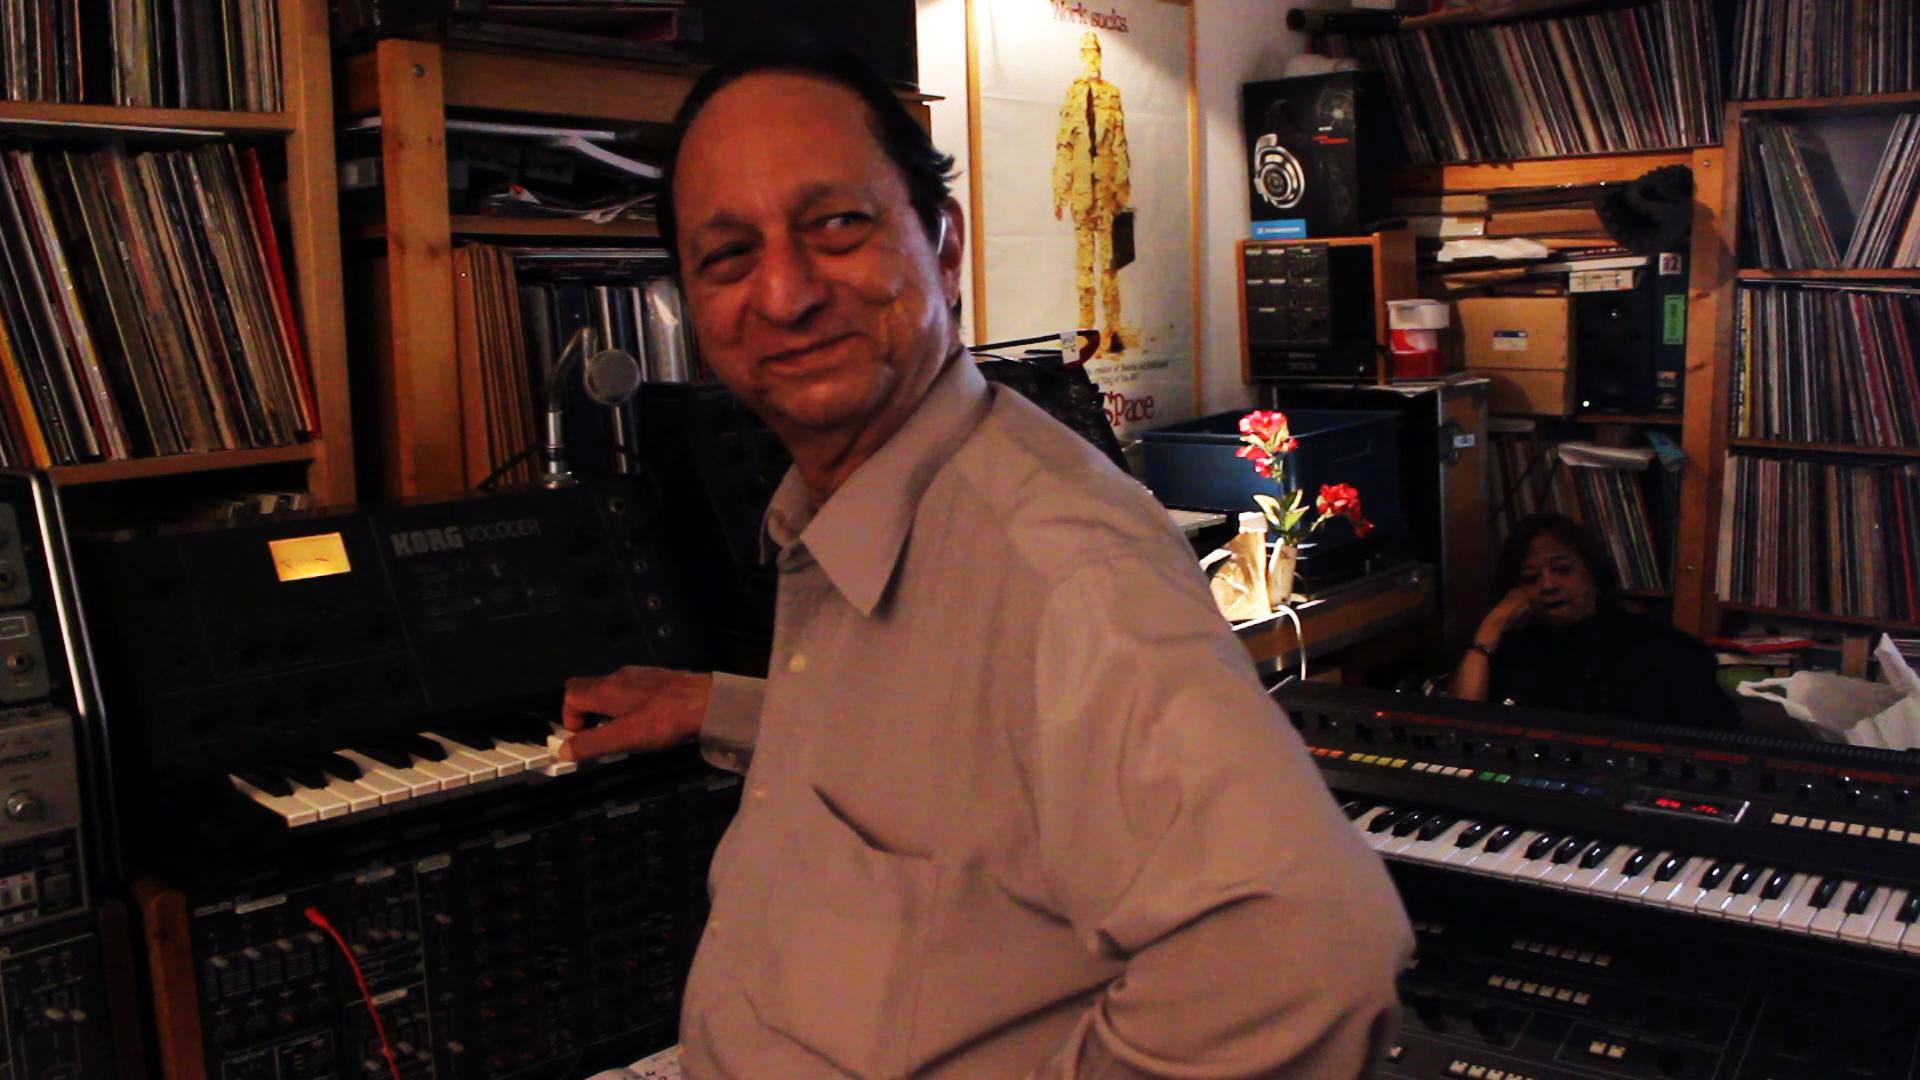 Charanjit Singh, who invented a new genre of music called Acid House